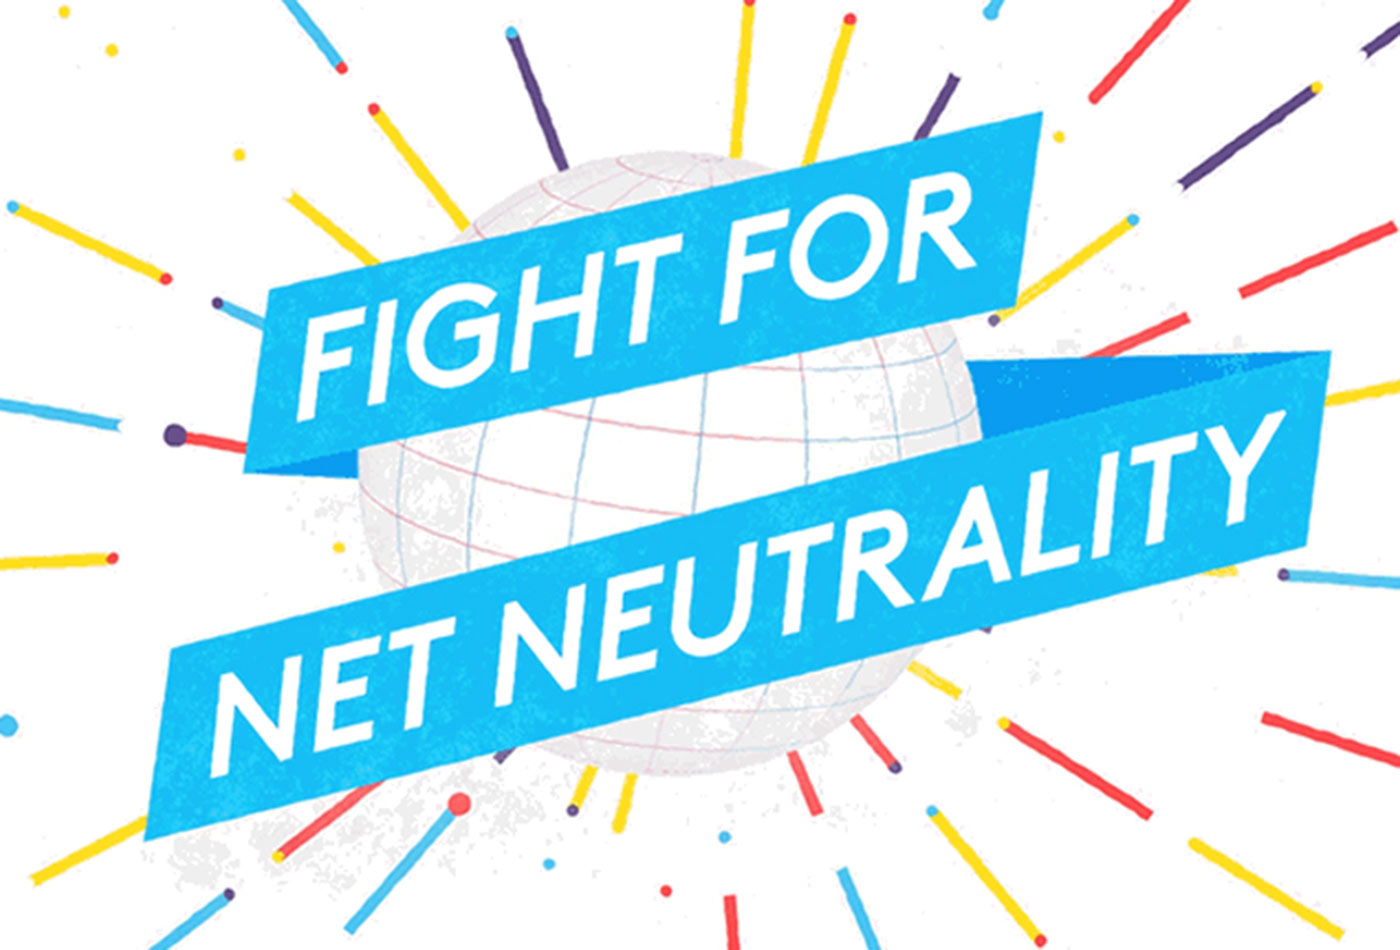 Join the fight for net neutrality.